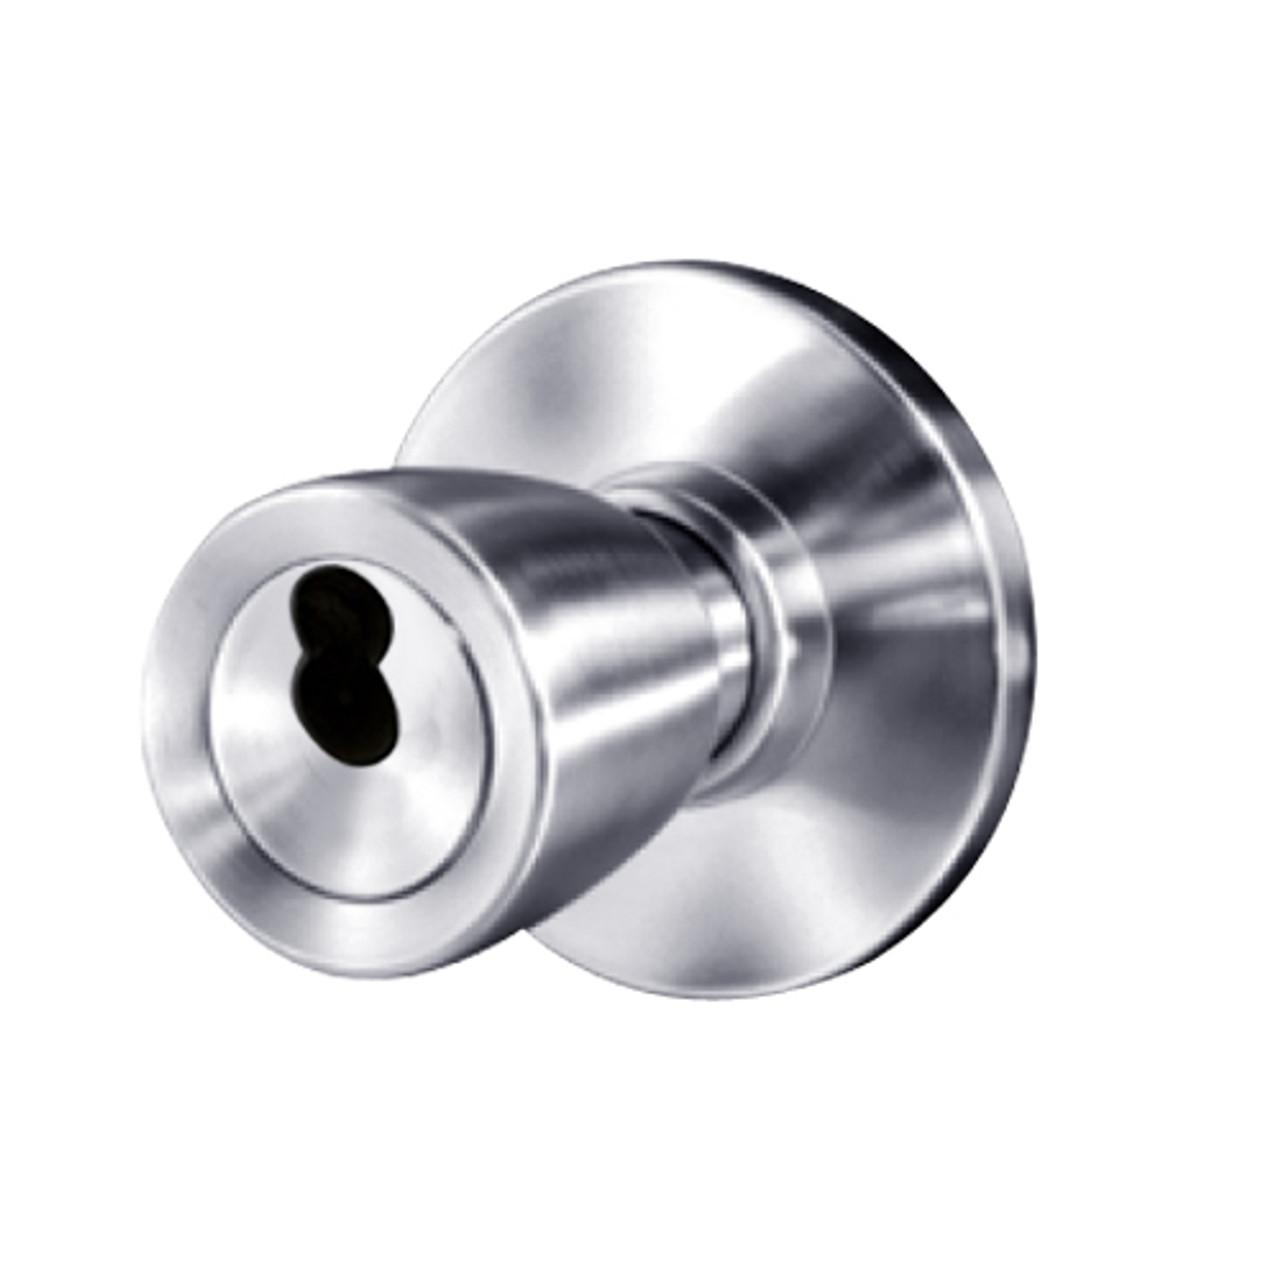 8K37YR6AS3626 Best 8K Series Exit Heavy Duty Cylindrical Knob Locks with Tulip Style in Satin Chrome